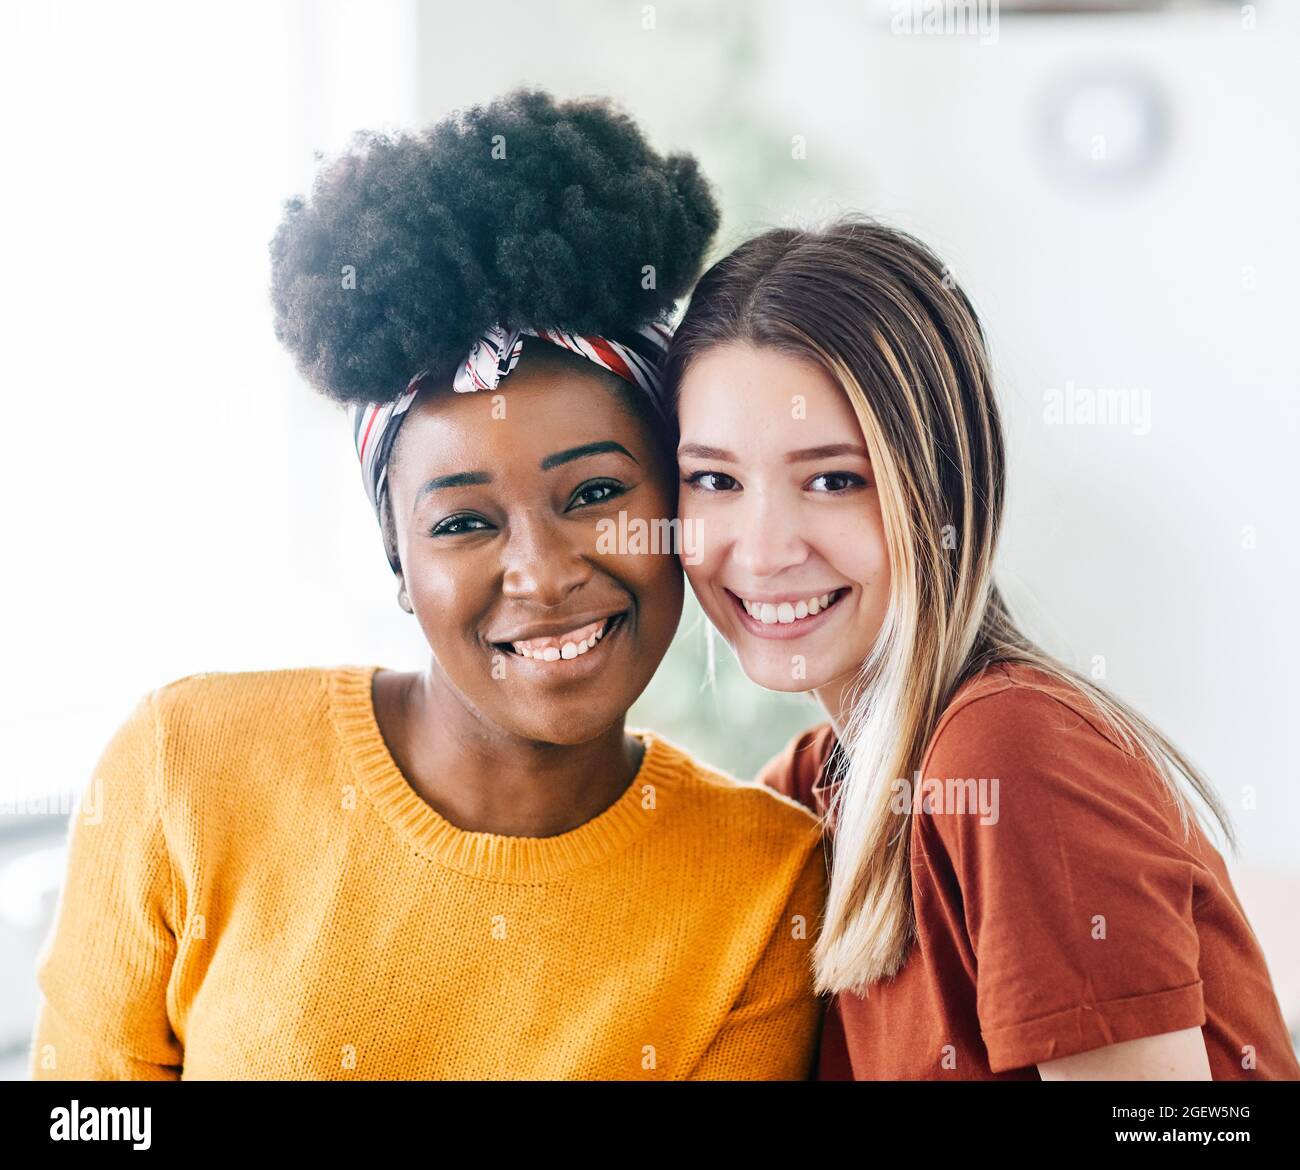 young woman girl friend friendship portrait smiling two love Stock Photo